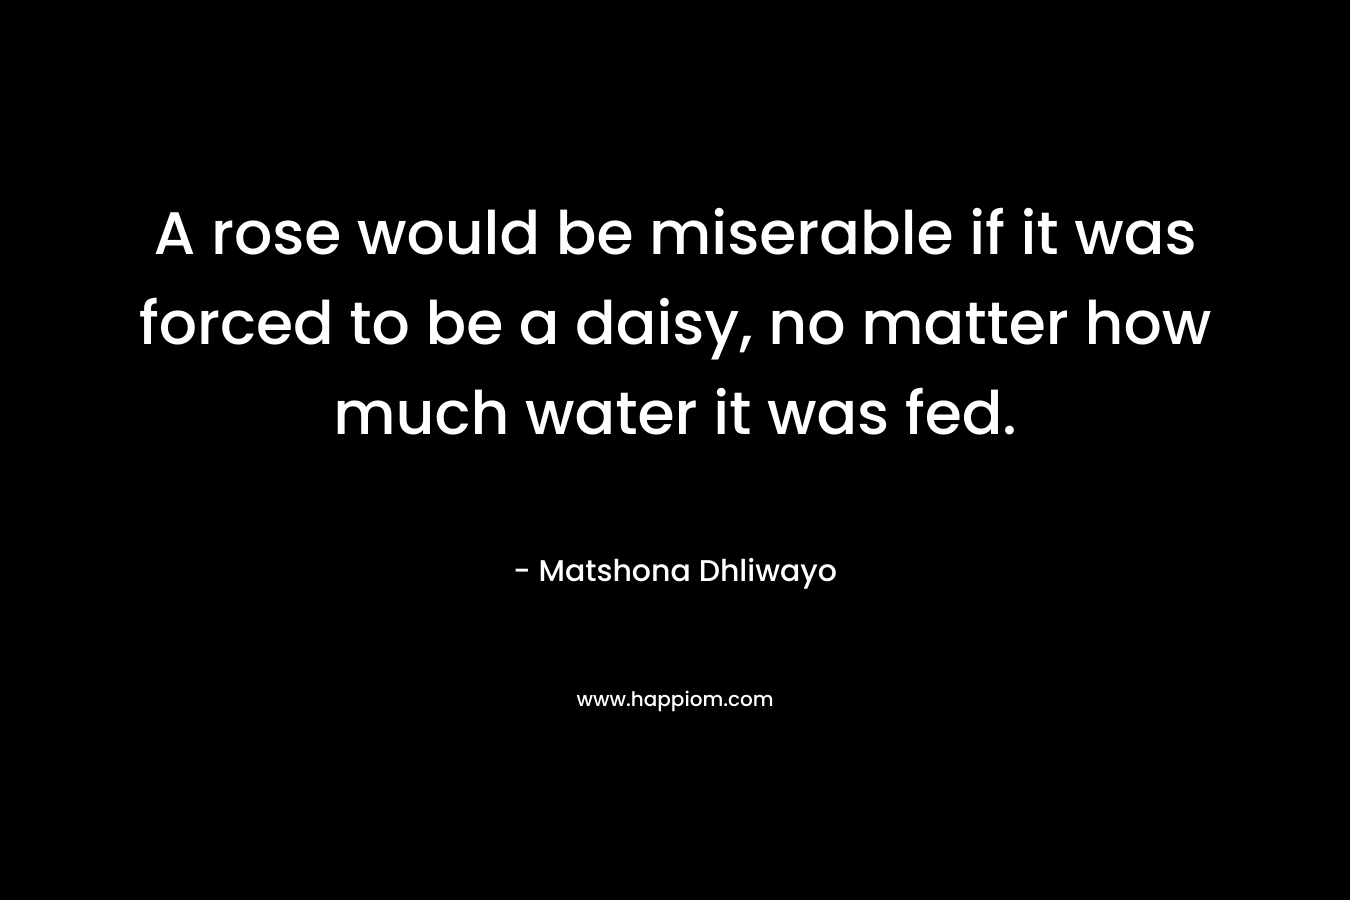 A rose would be miserable if it was forced to be a daisy, no matter how much water it was fed. – Matshona Dhliwayo